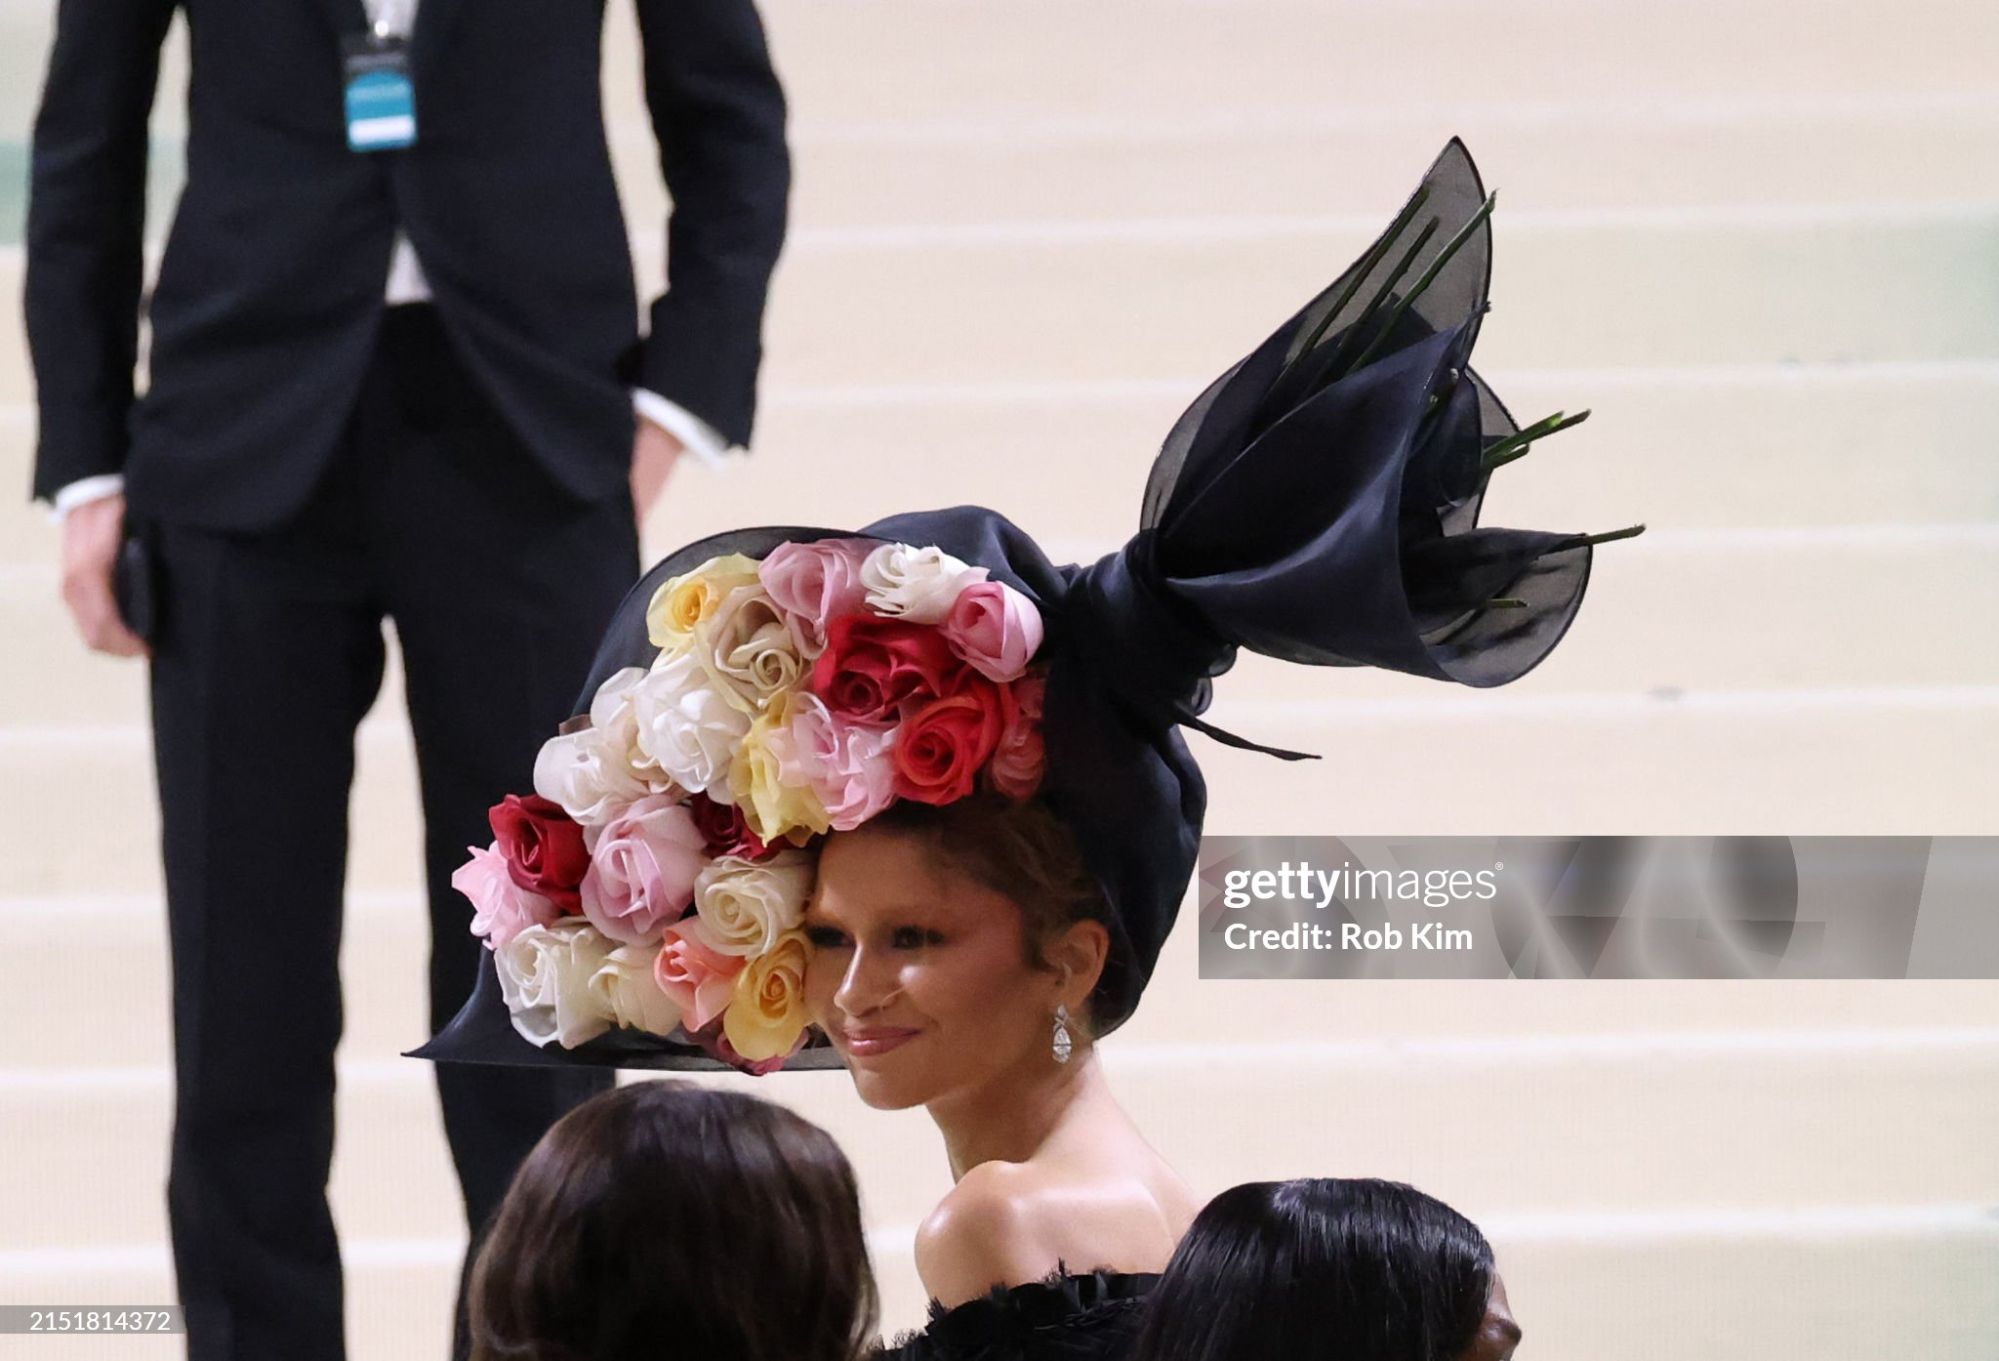 gettyimages-2151814372-2048x2048.jpg